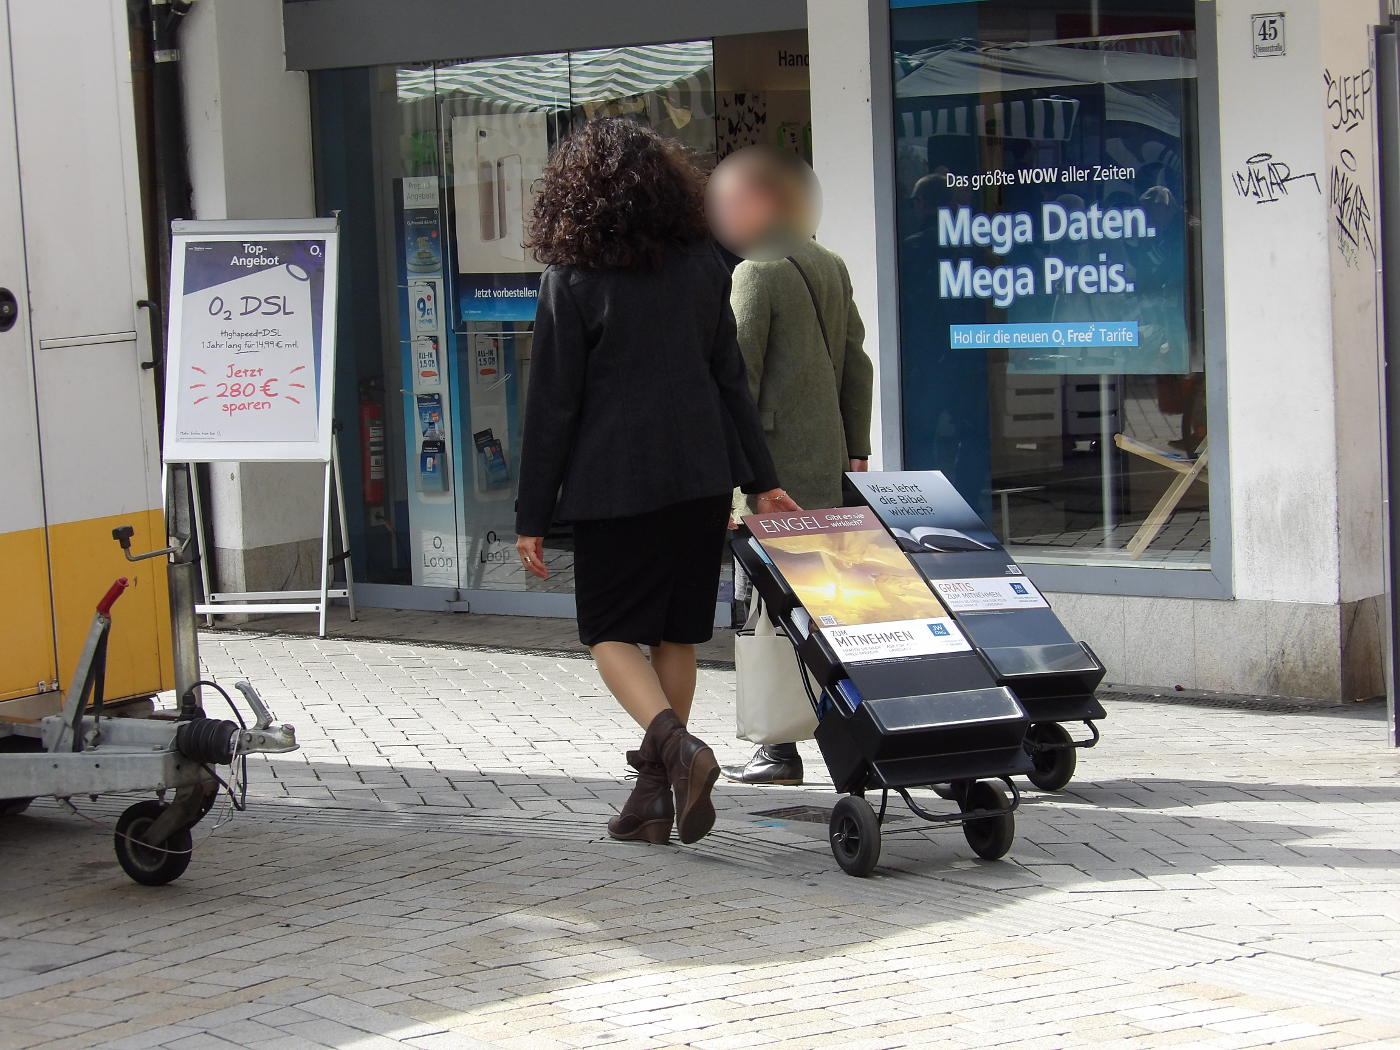 Hail Jehovah – the future owners of Heilbronn: miserable